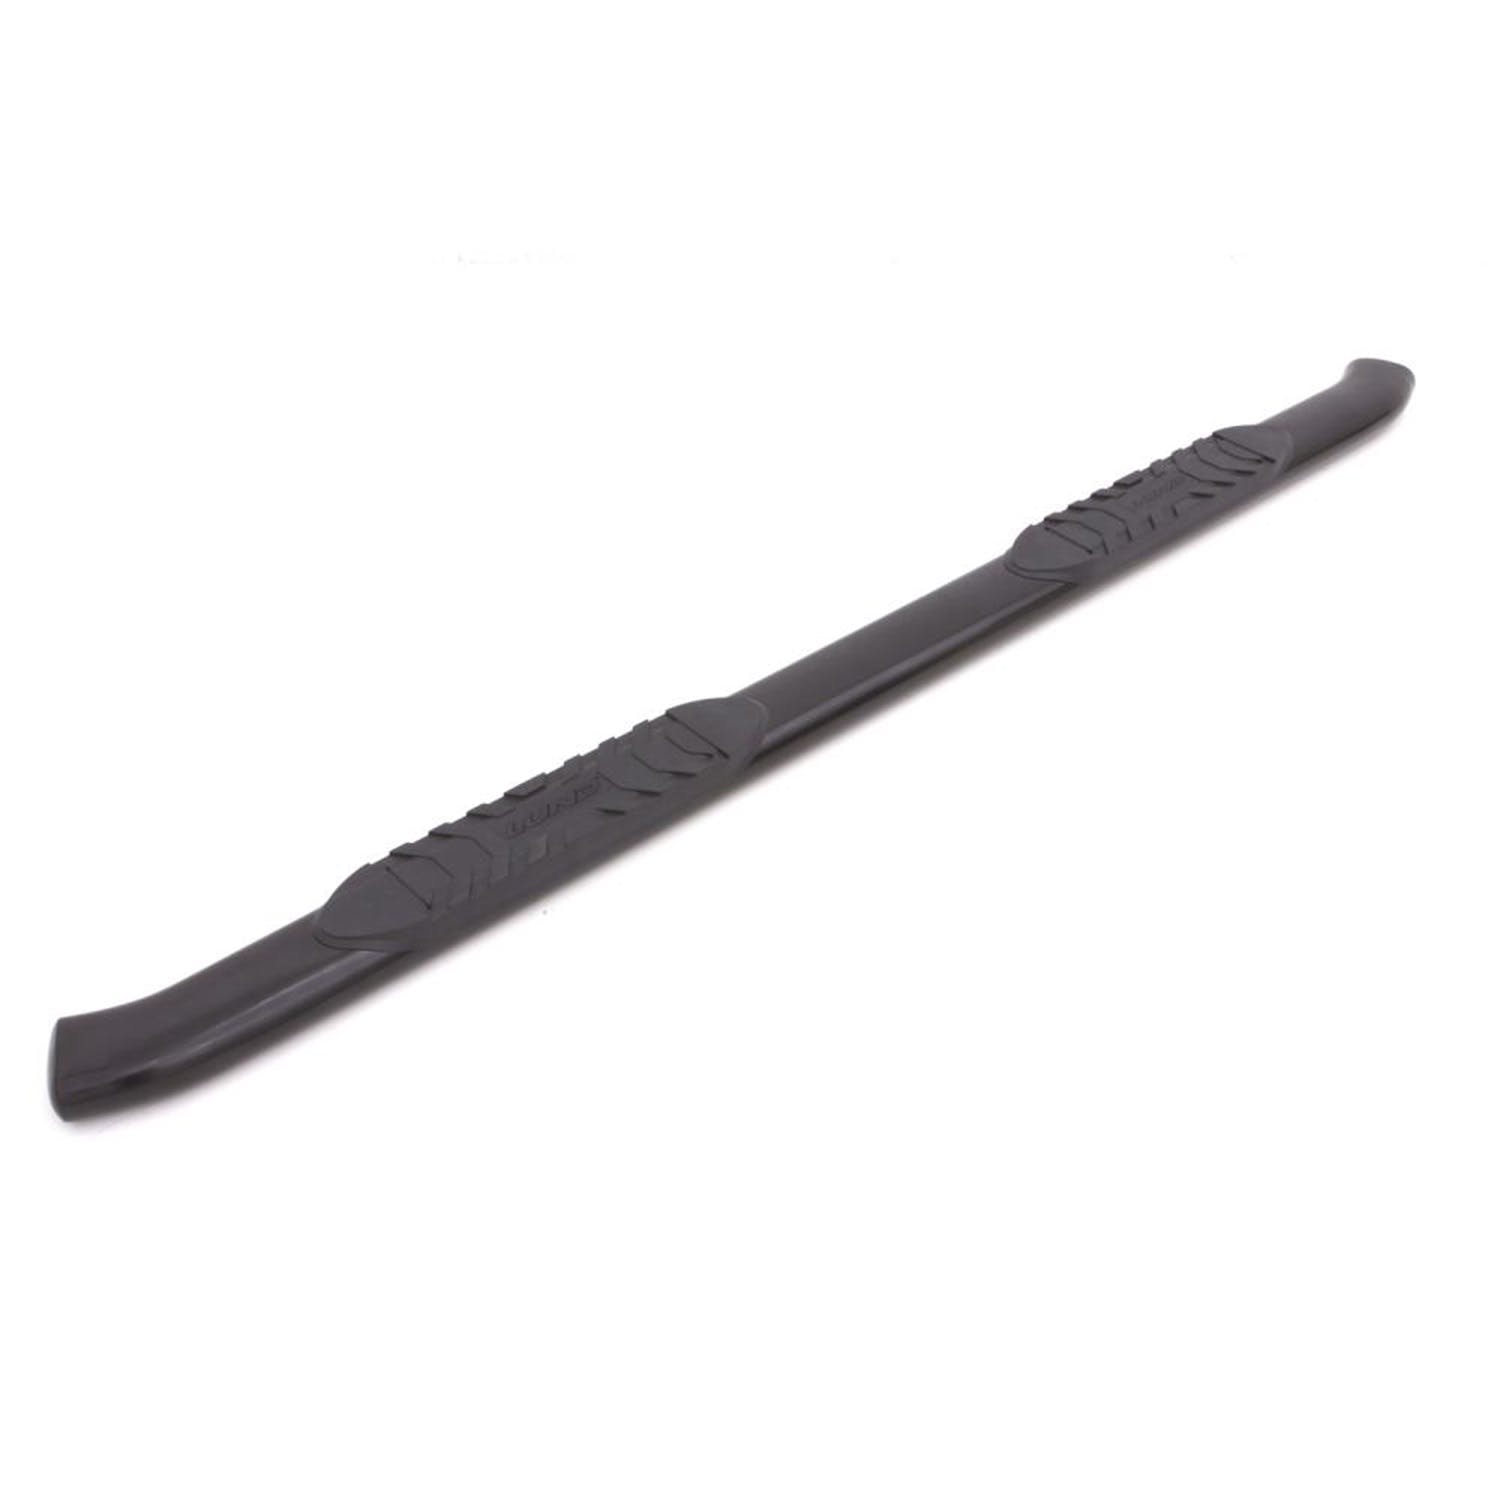 LUND 24284295 5 Inch Oval Curved Nerf Bar - Black LUND -5 inch CURVED OVAL BLACK SS